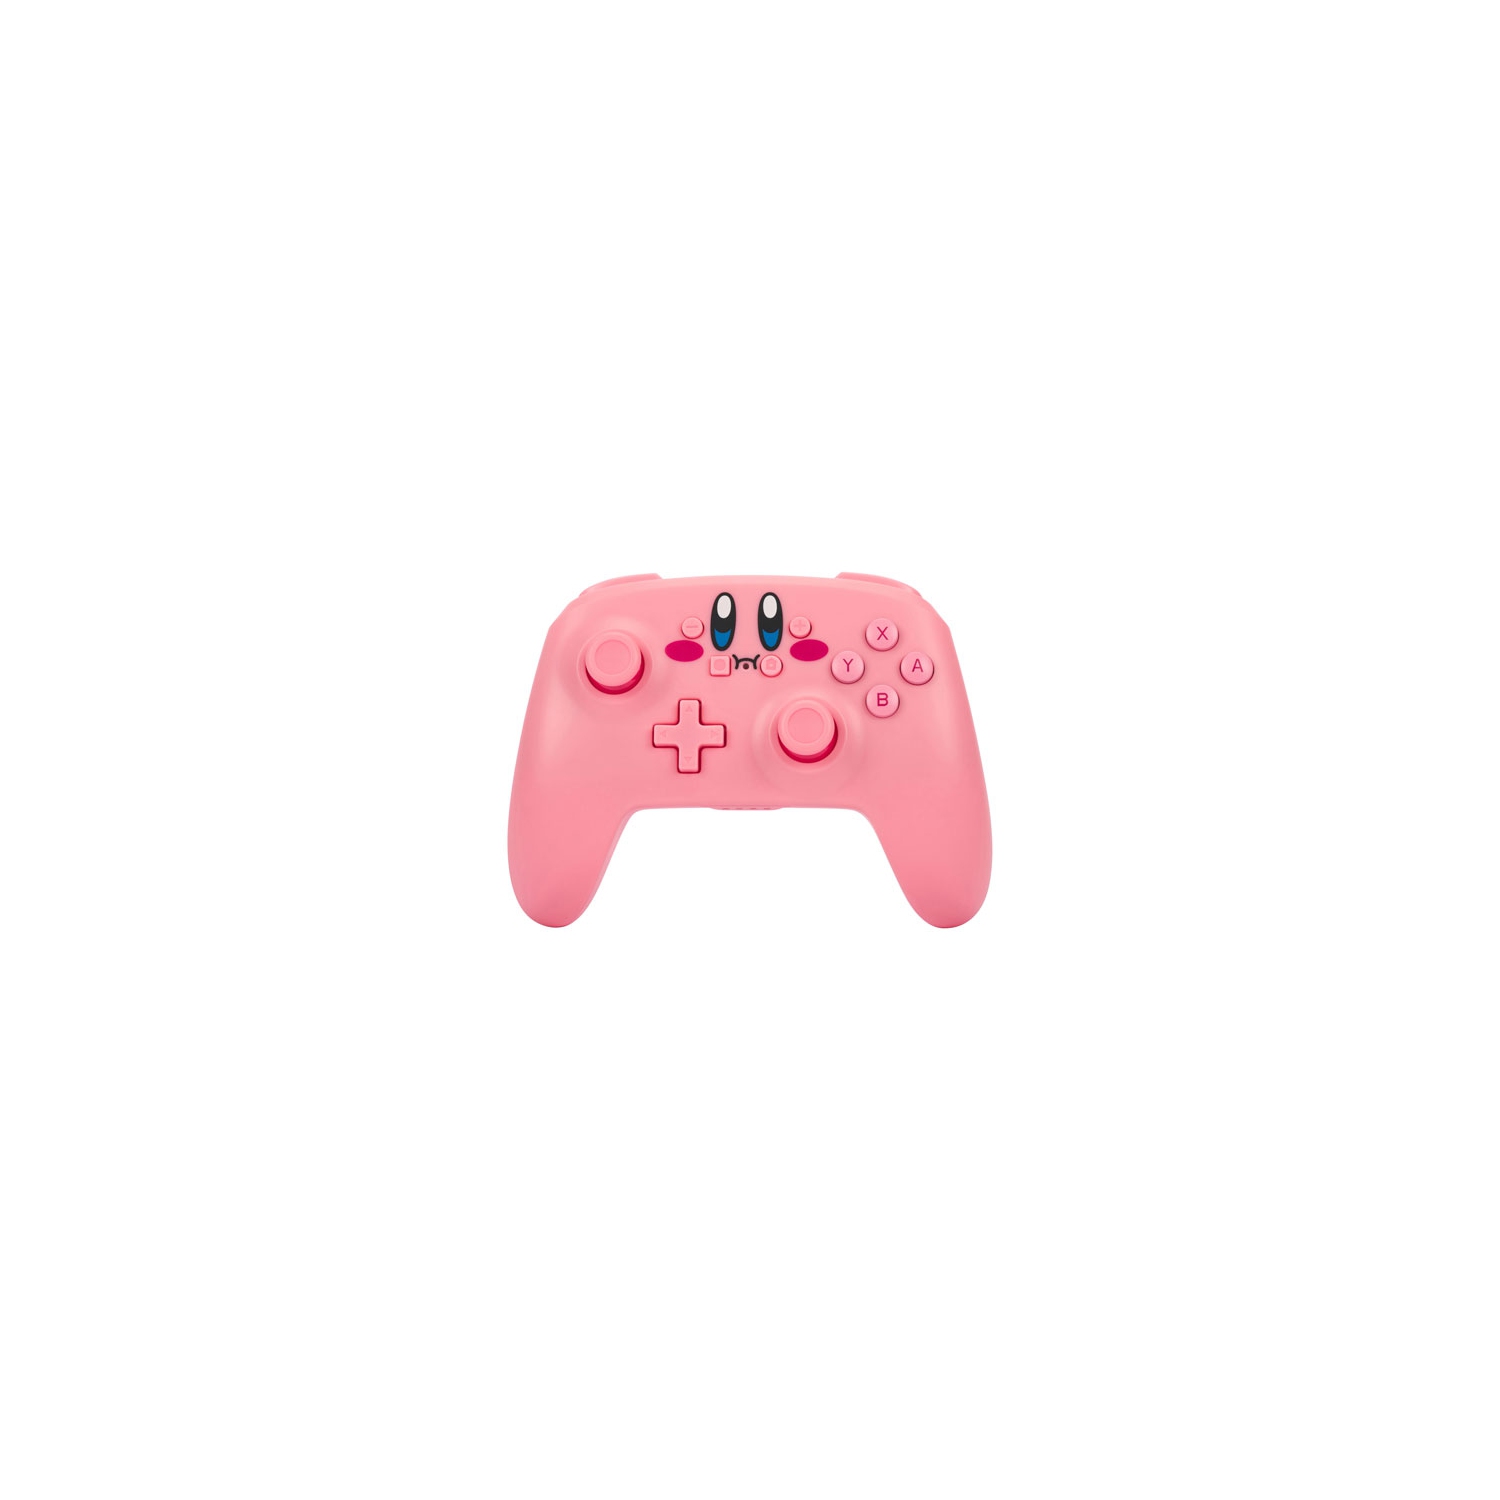 Refurbished (Good) PowerA Kirby Mouth Wireless Controller for Nintendo Switch - Pink